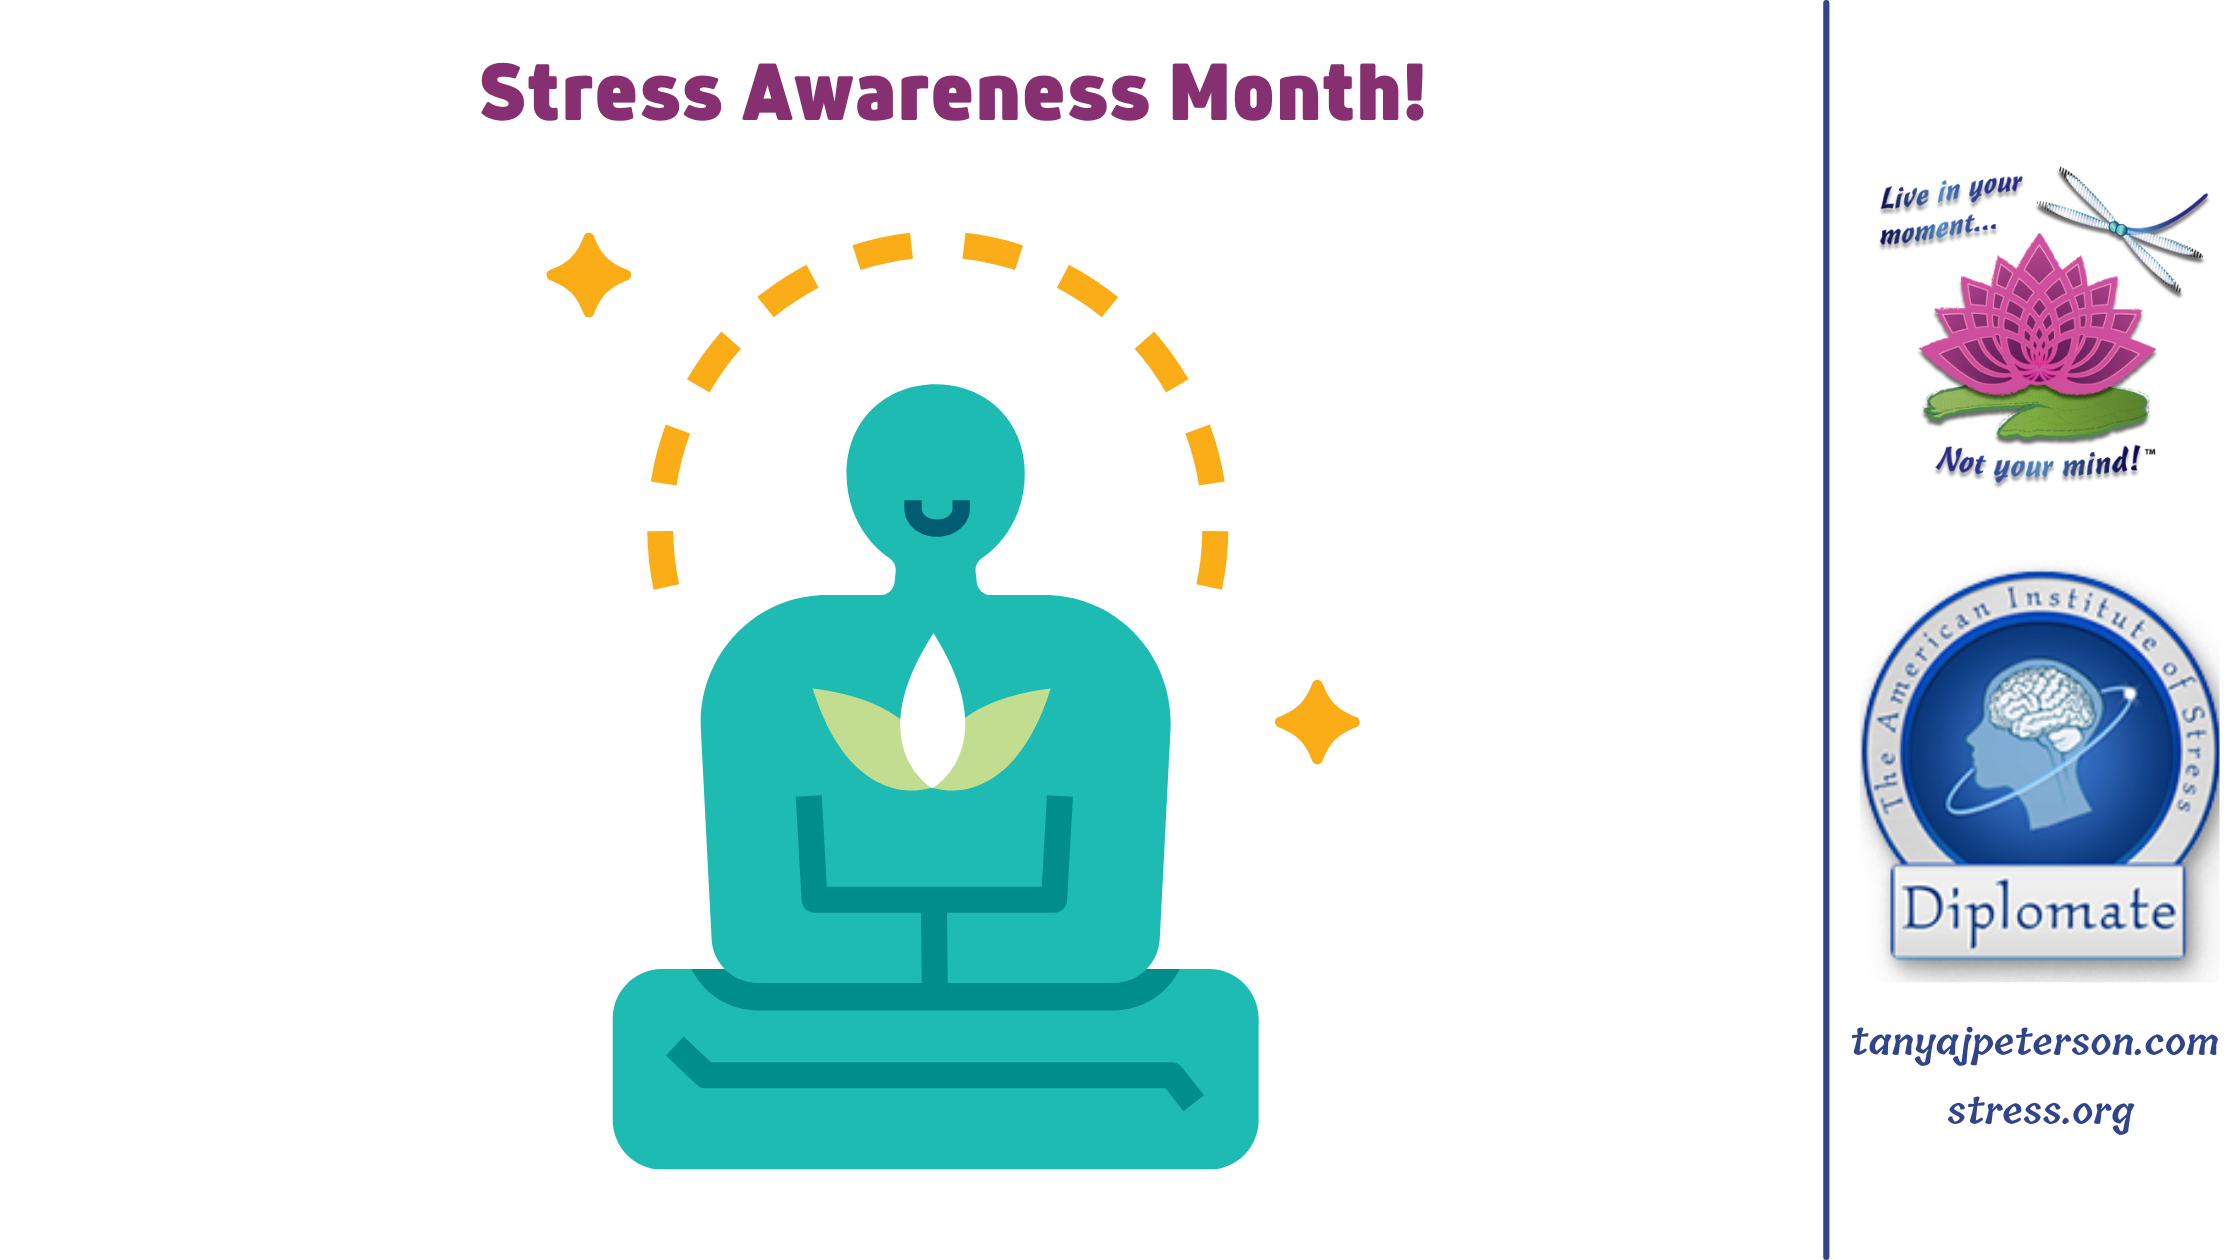 April is stress awareness month. The Yerkes-Dodson Law says balanced stress is best. Here’s how that will benefit us and a tip to achieve it.